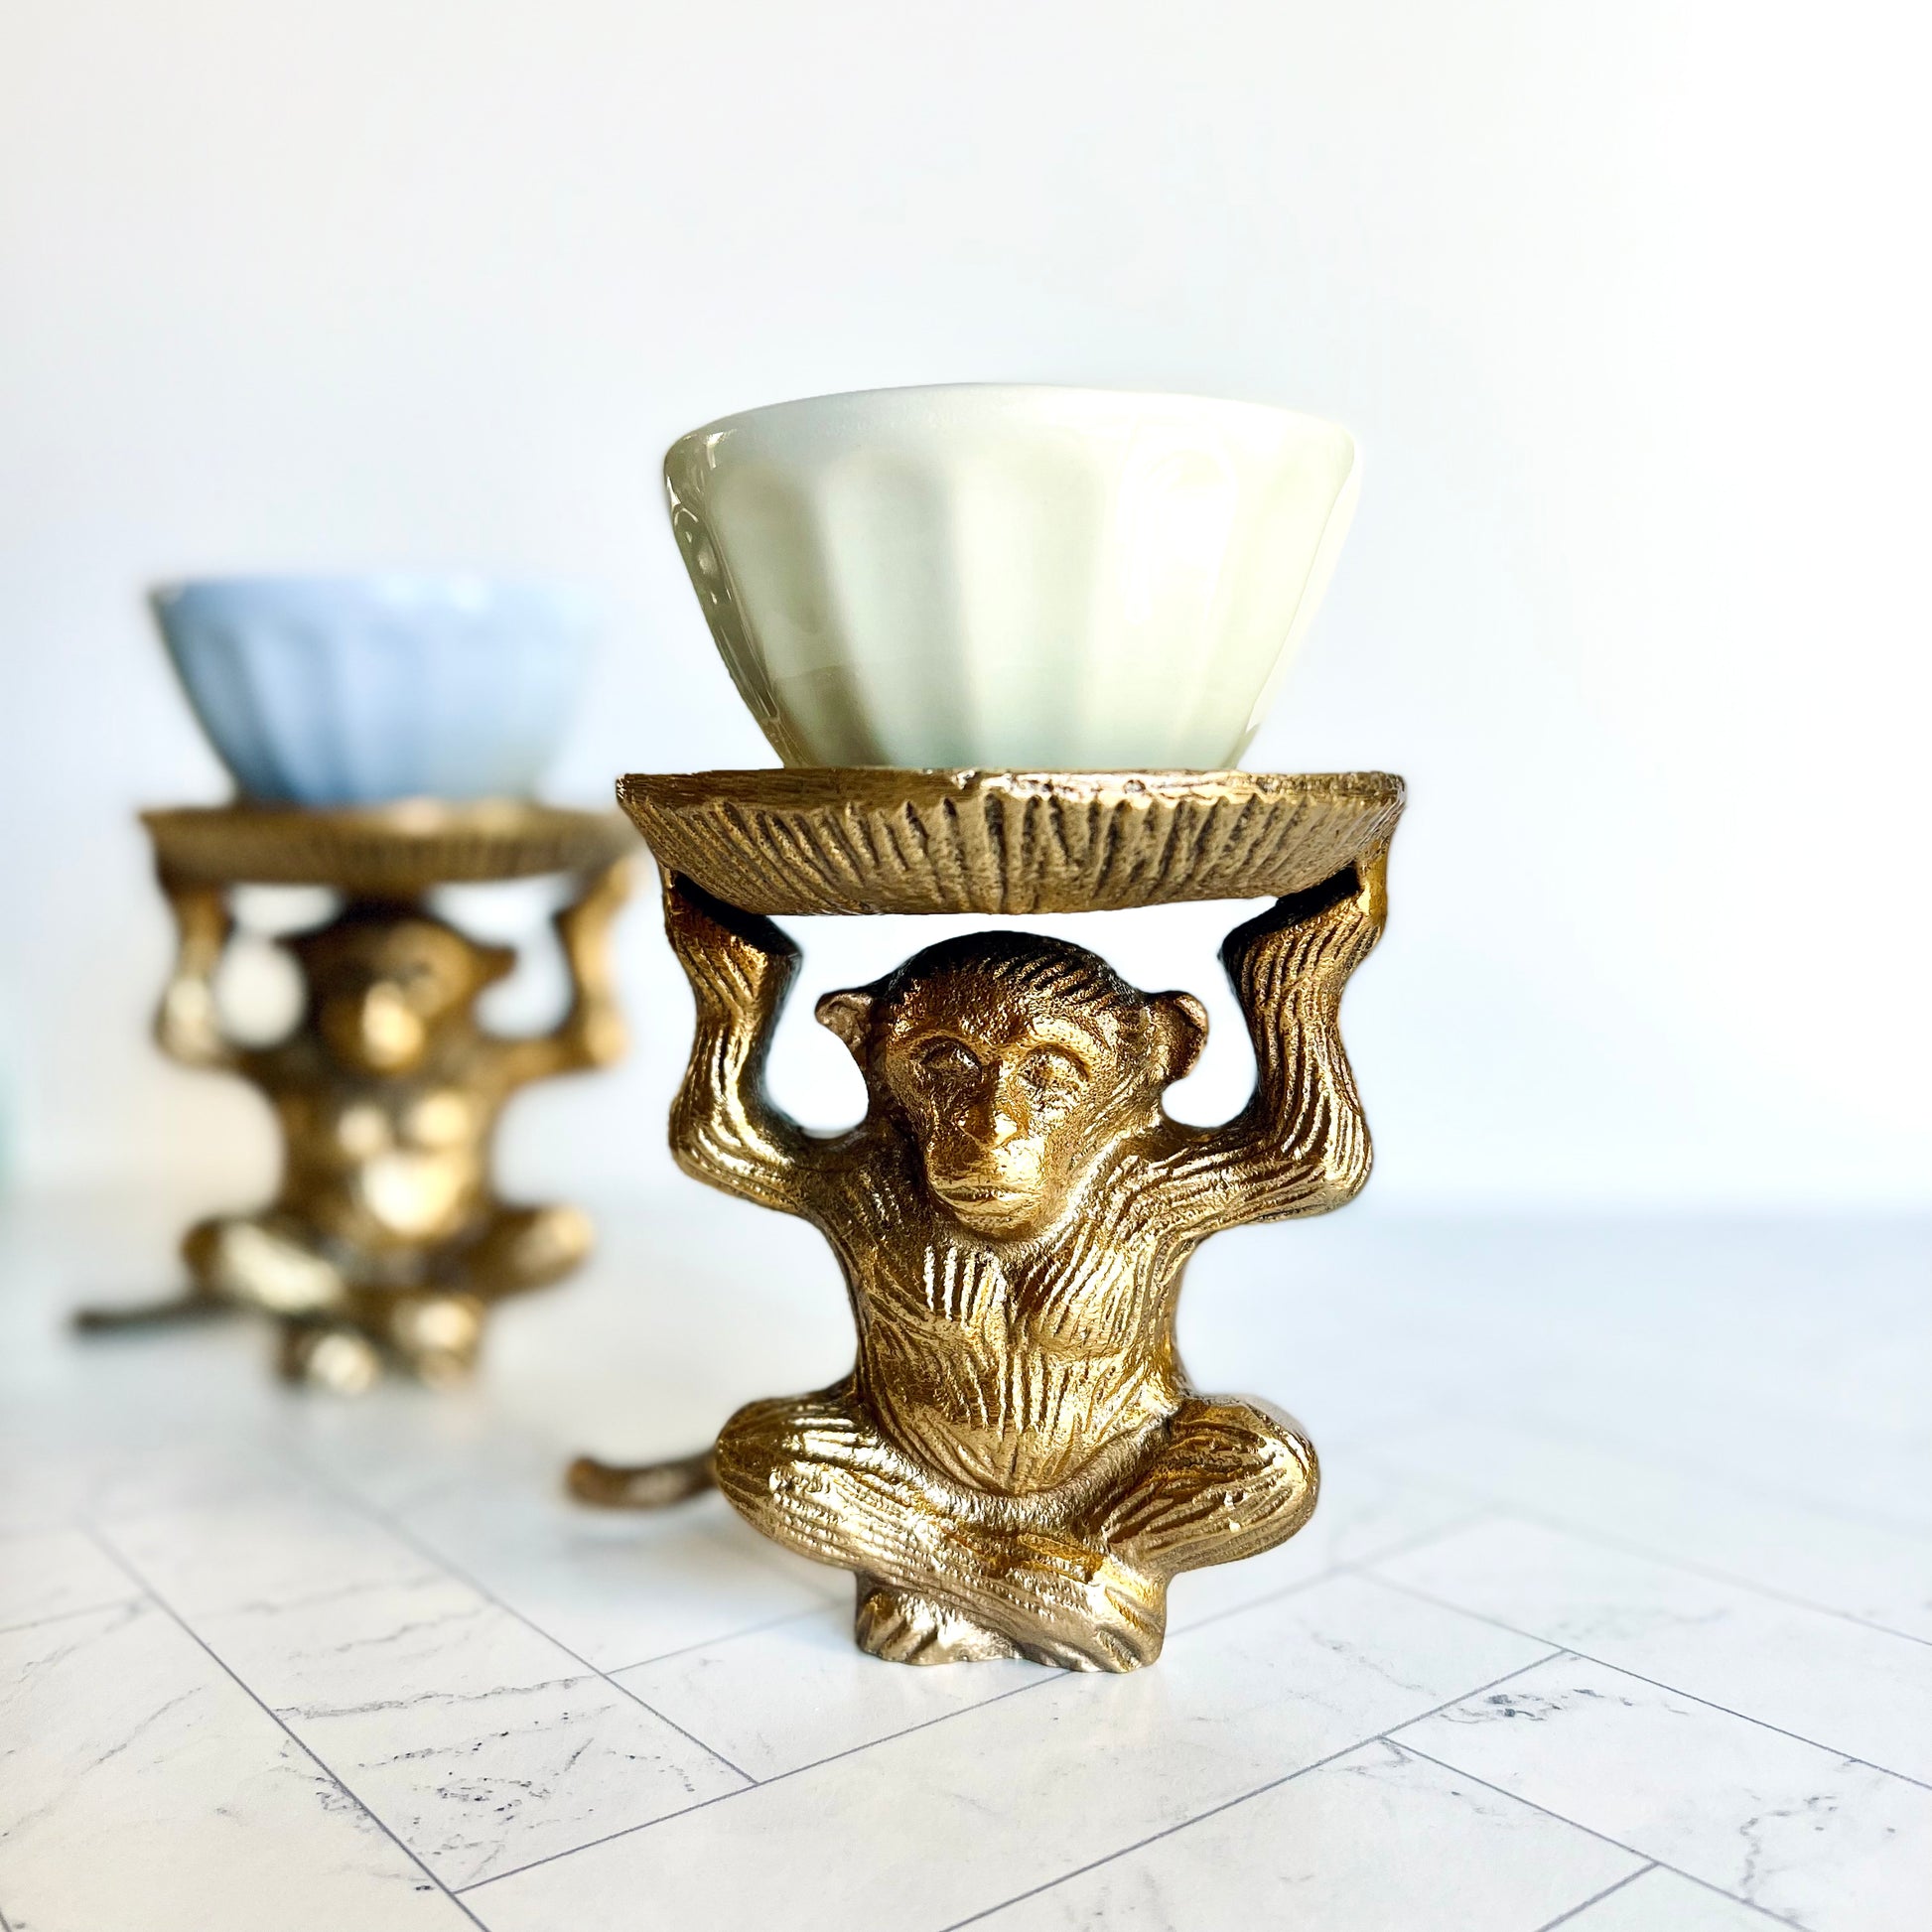 A brass monkey figurine with a second one in the background